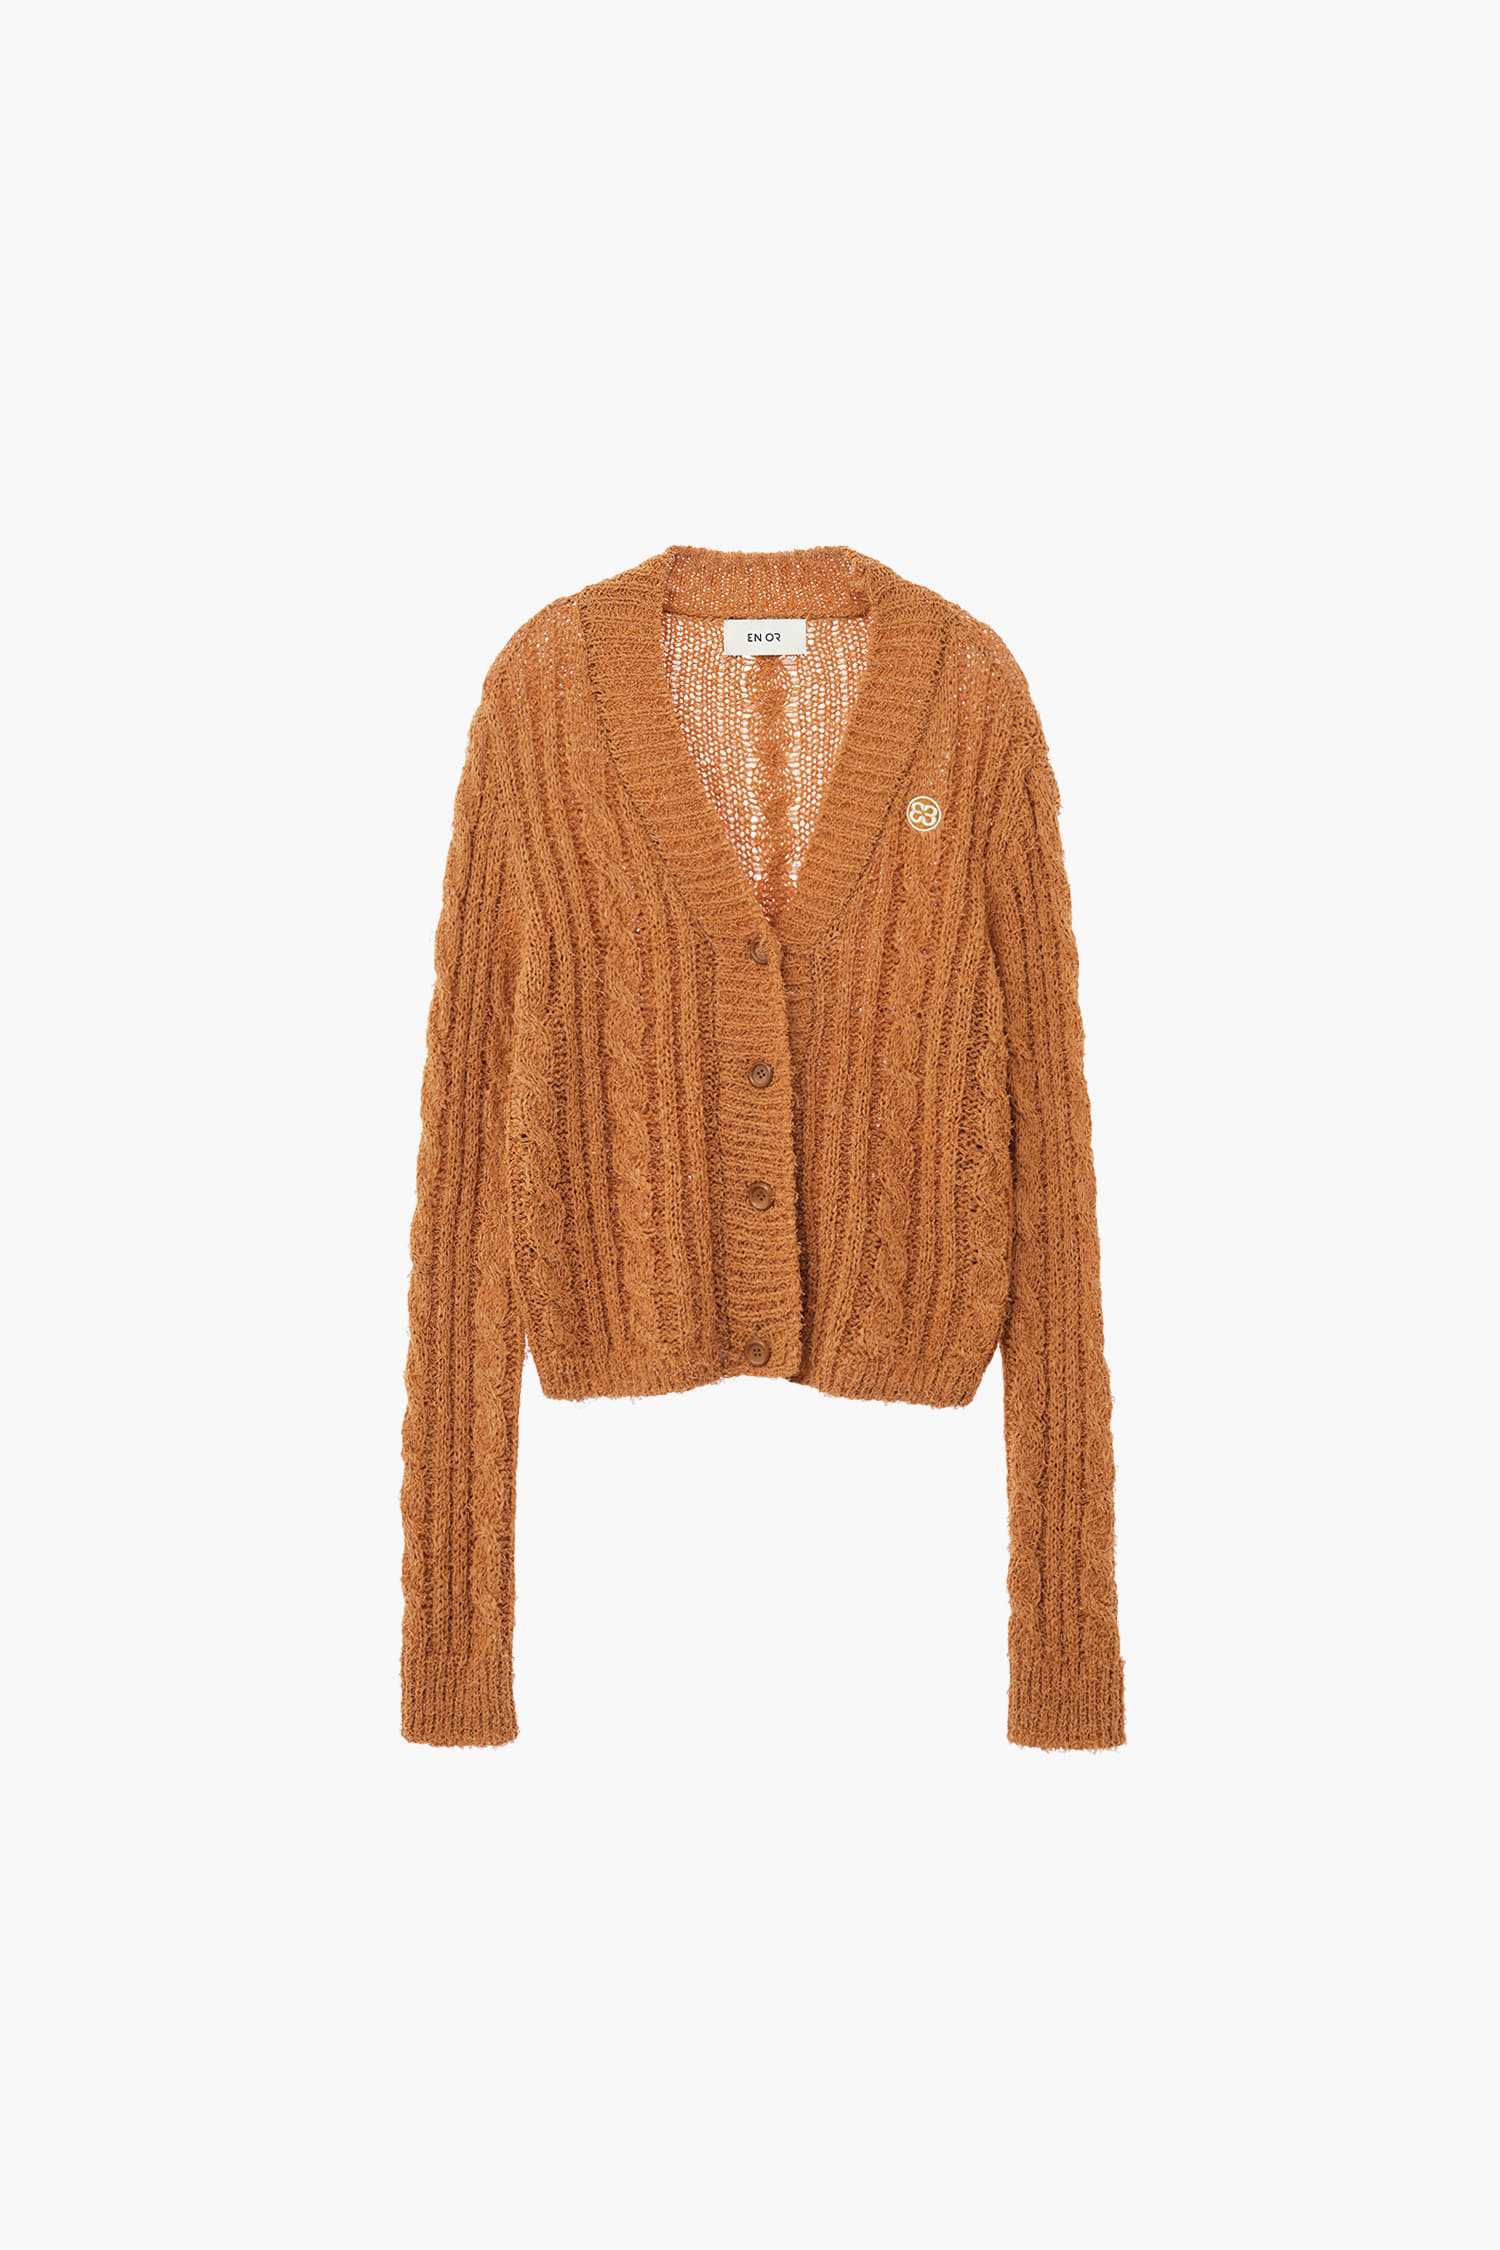 LOOSE KNITTED CABLE CARDIGAN - ORANGE